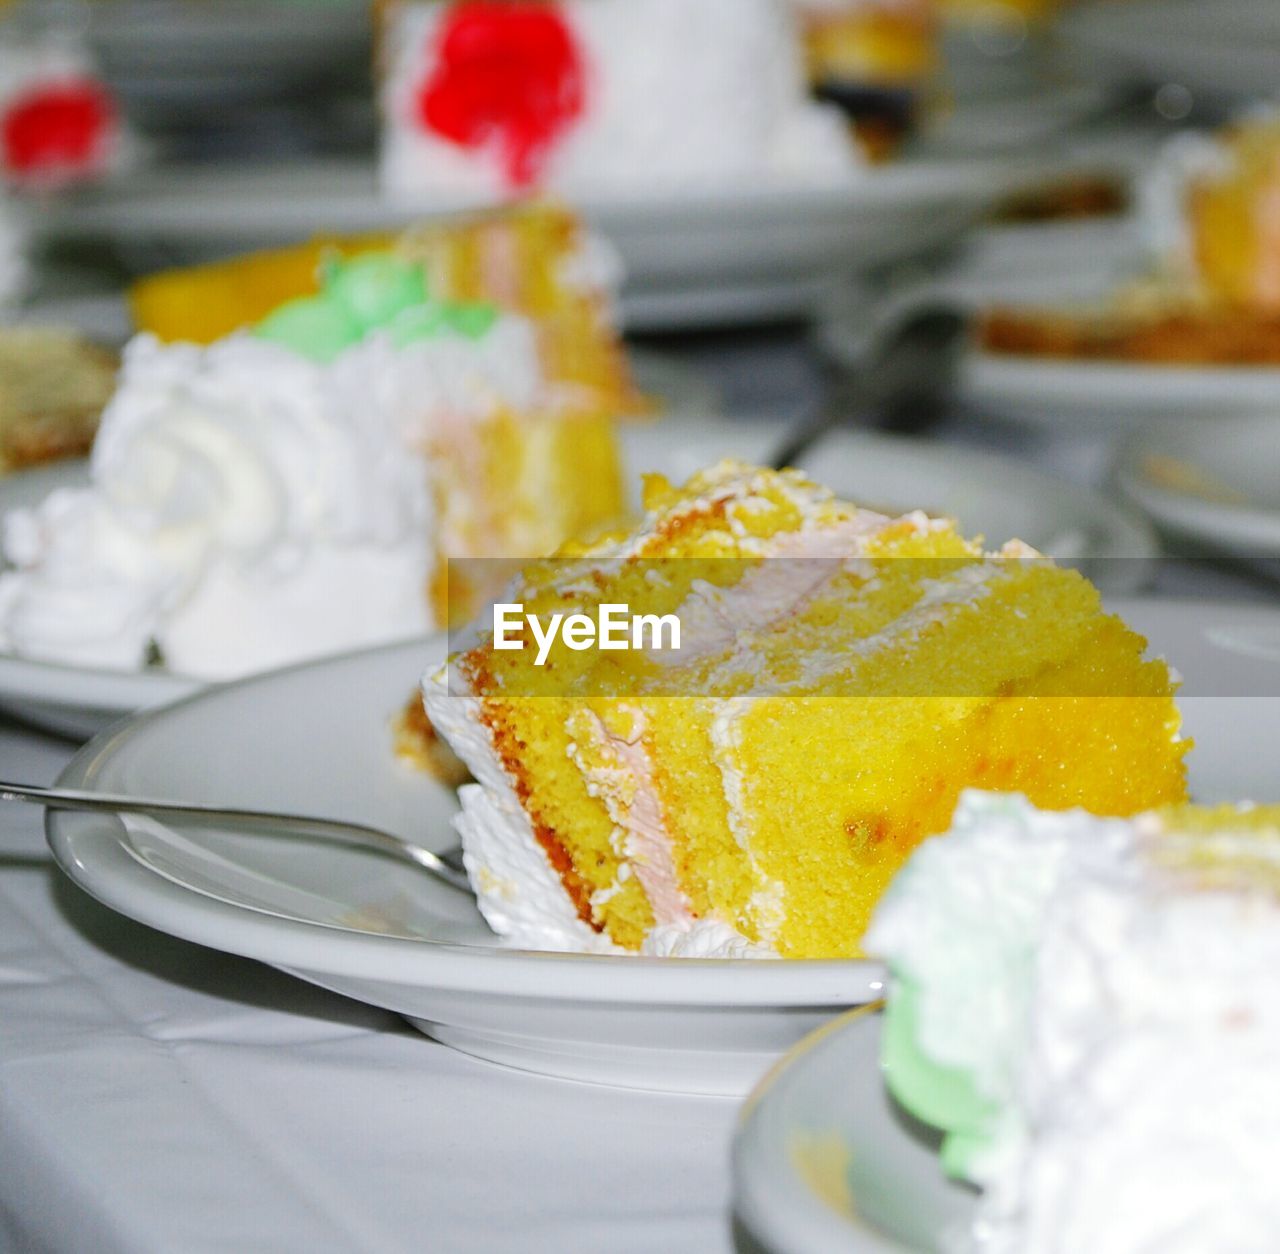 CLOSE-UP OF CAKE SLICE IN PLATE